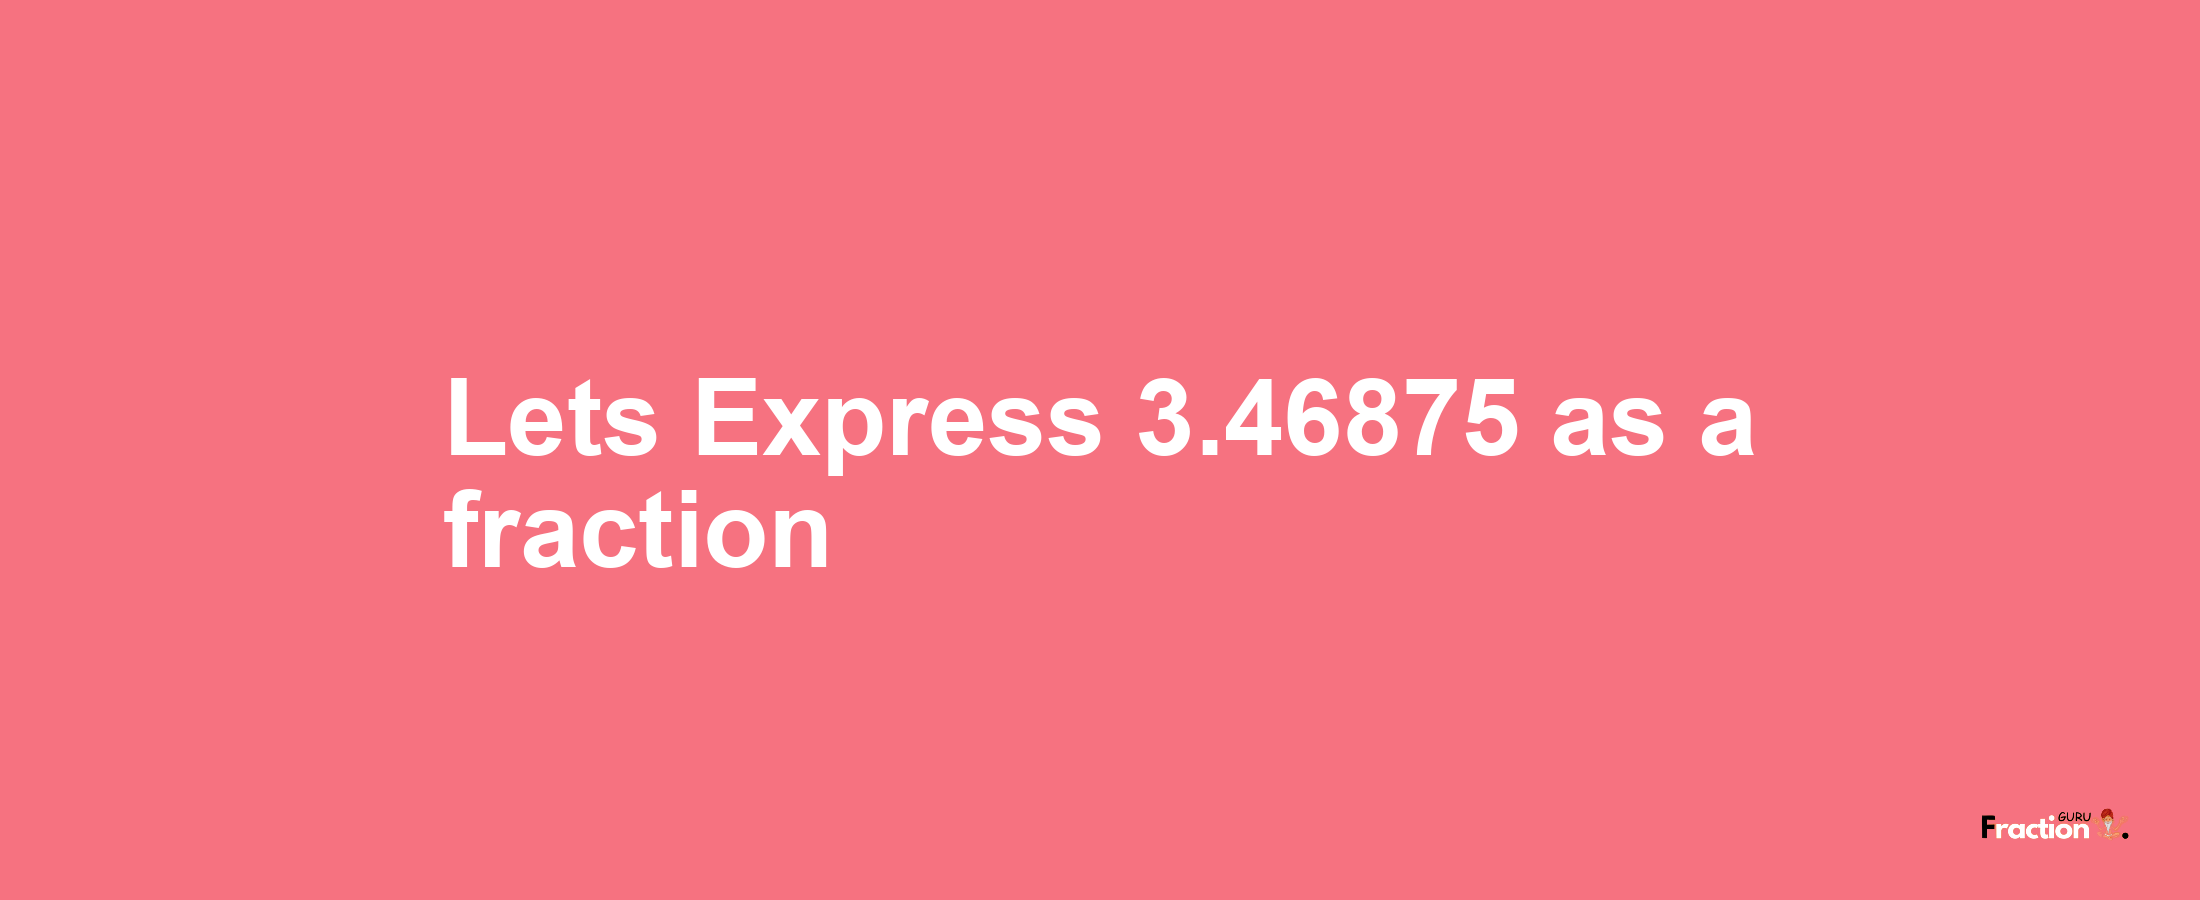 Lets Express 3.46875 as afraction